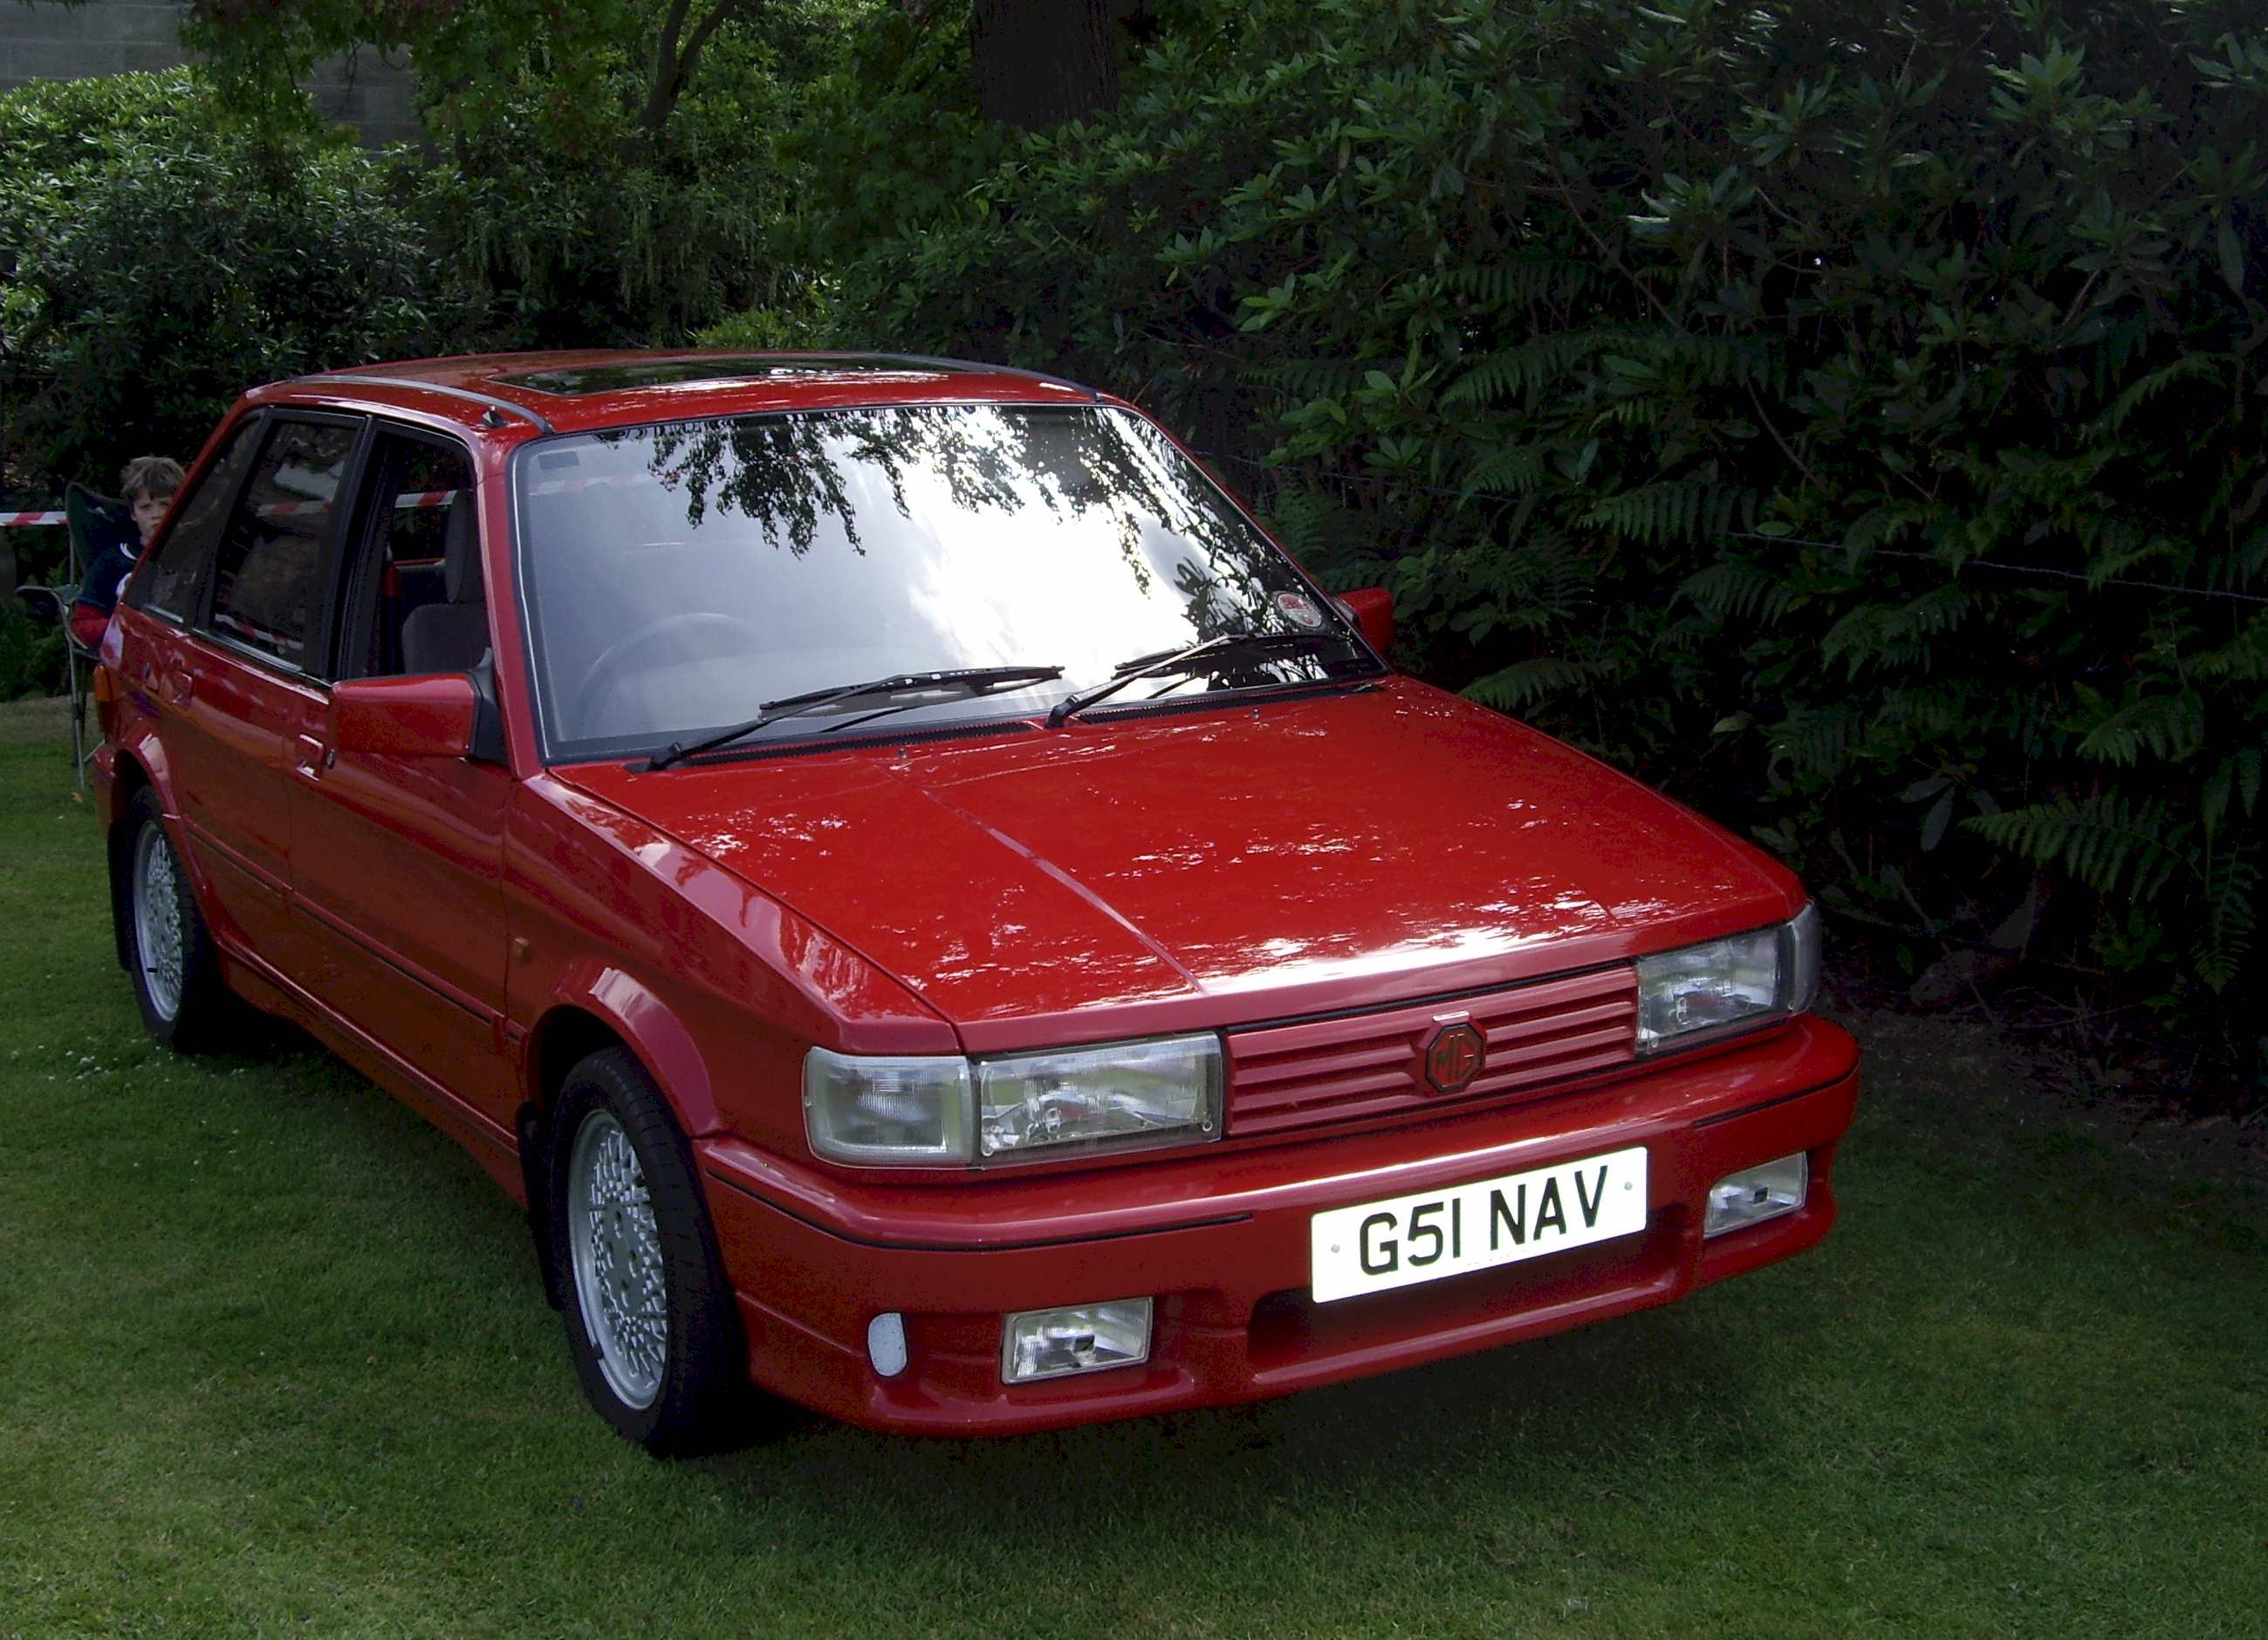 MG Maestro Turbo, Car of the Show